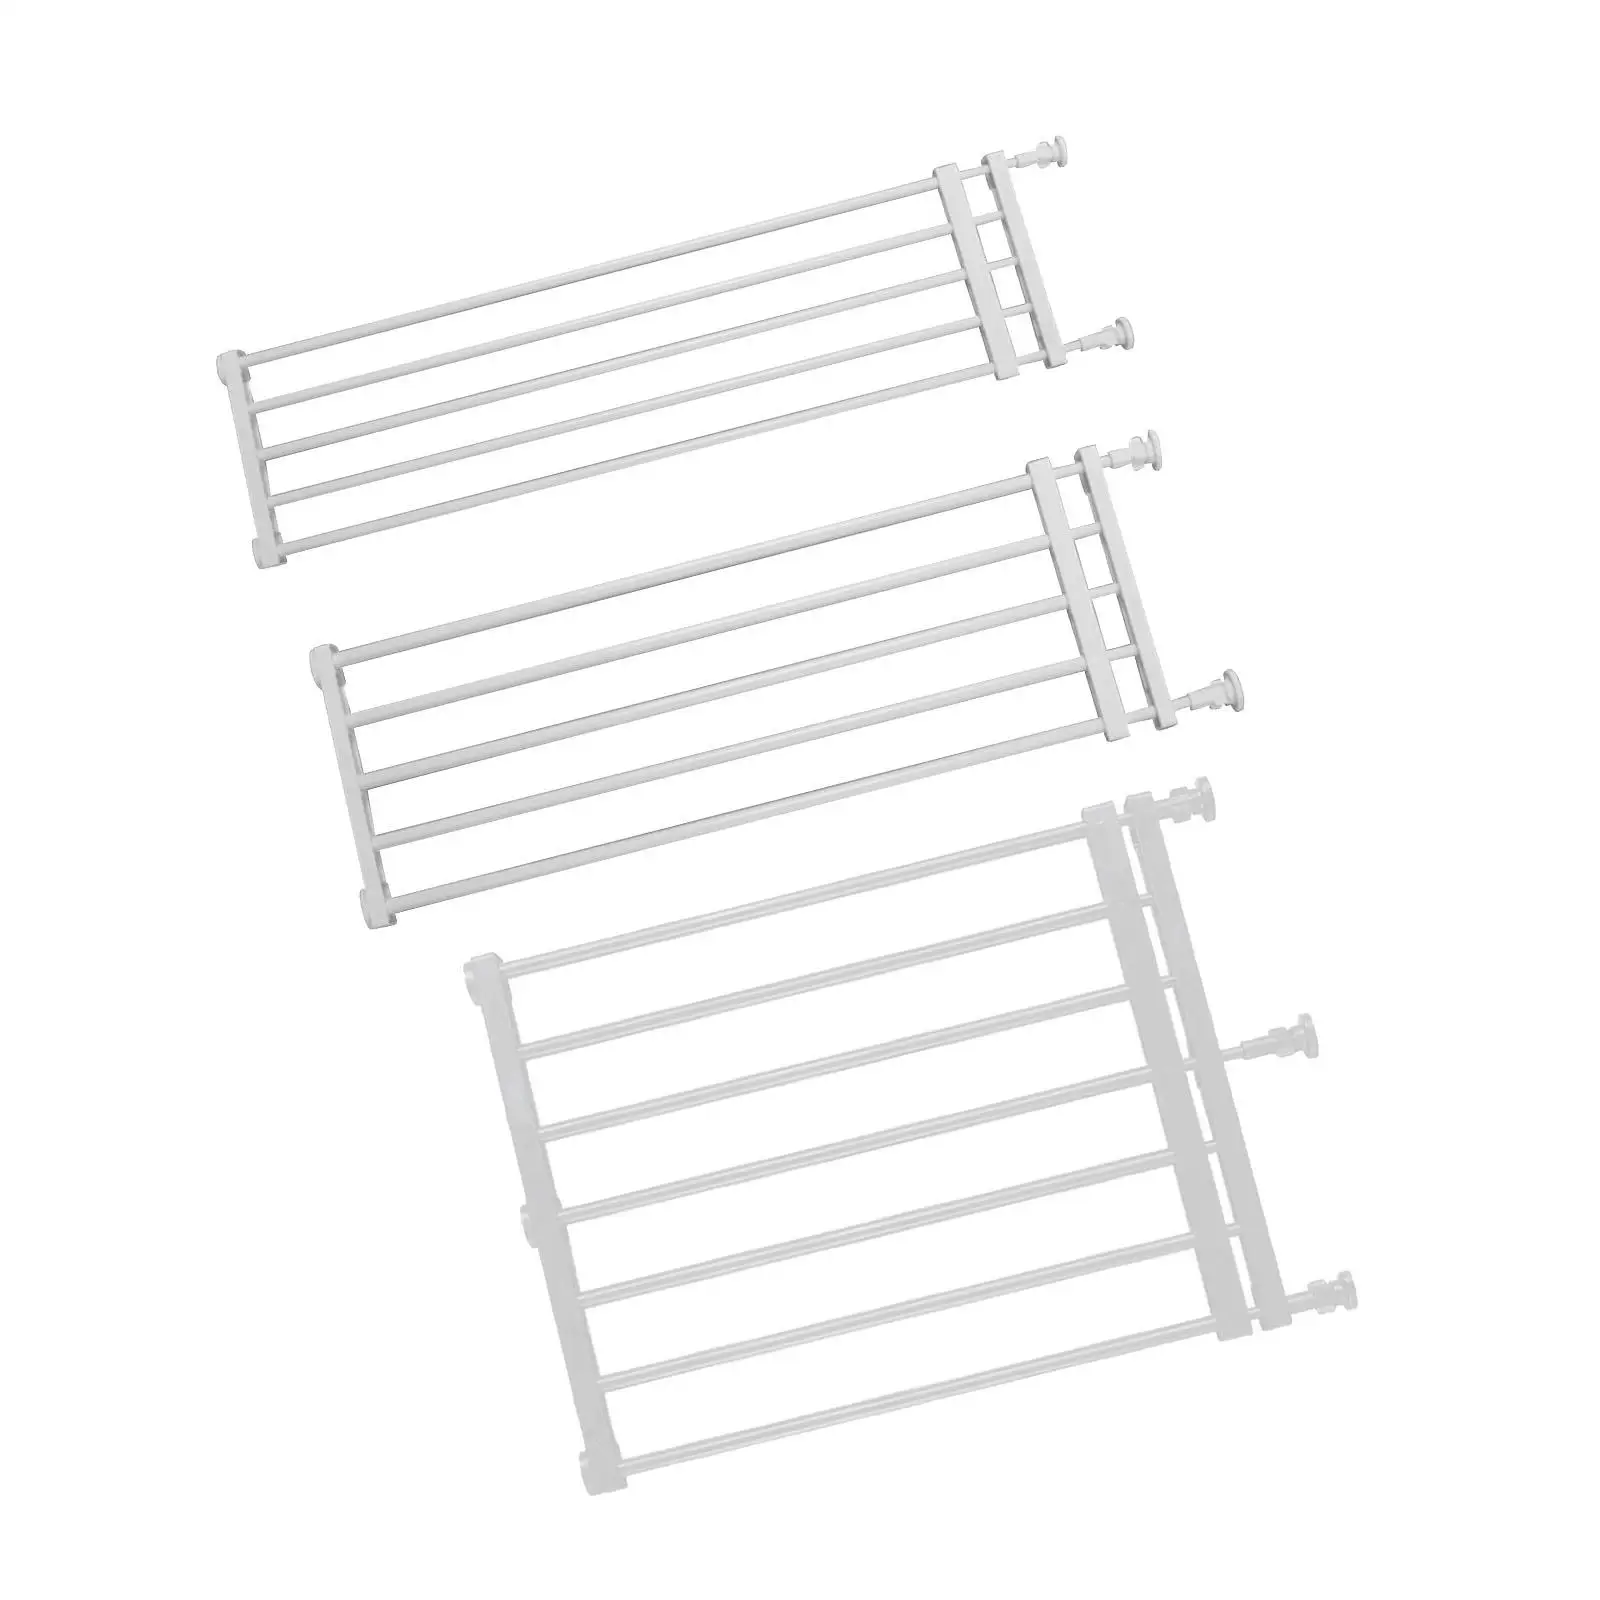 Portable Expandable Dog Gate Stair Gate Adjustable Screen Door Protection Barrier Fence for Patio Lawn Stairs